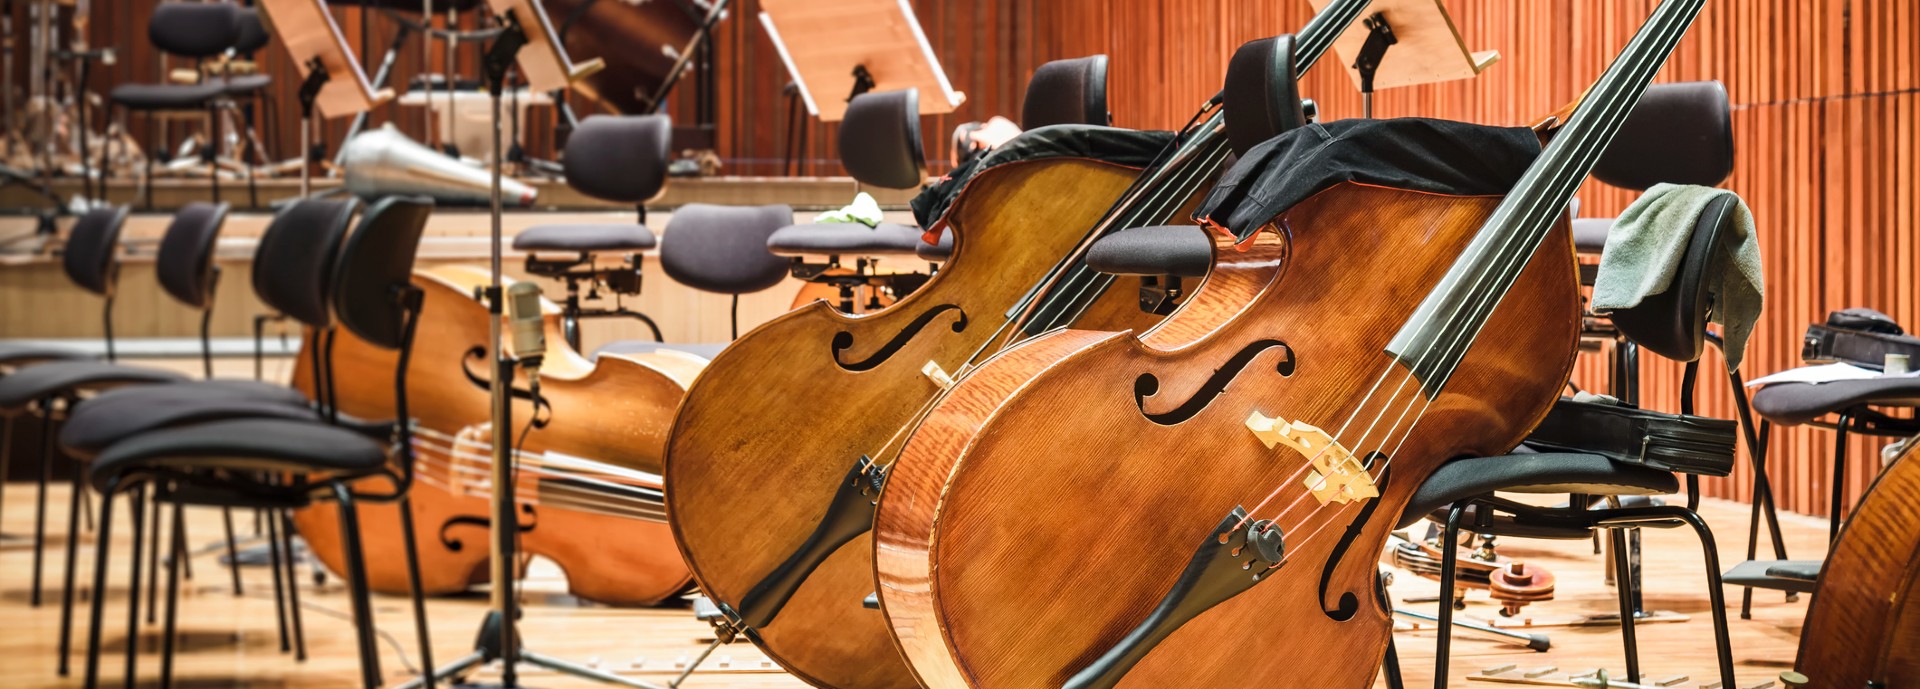 Orchestra instruments lean against seats in a performance hall